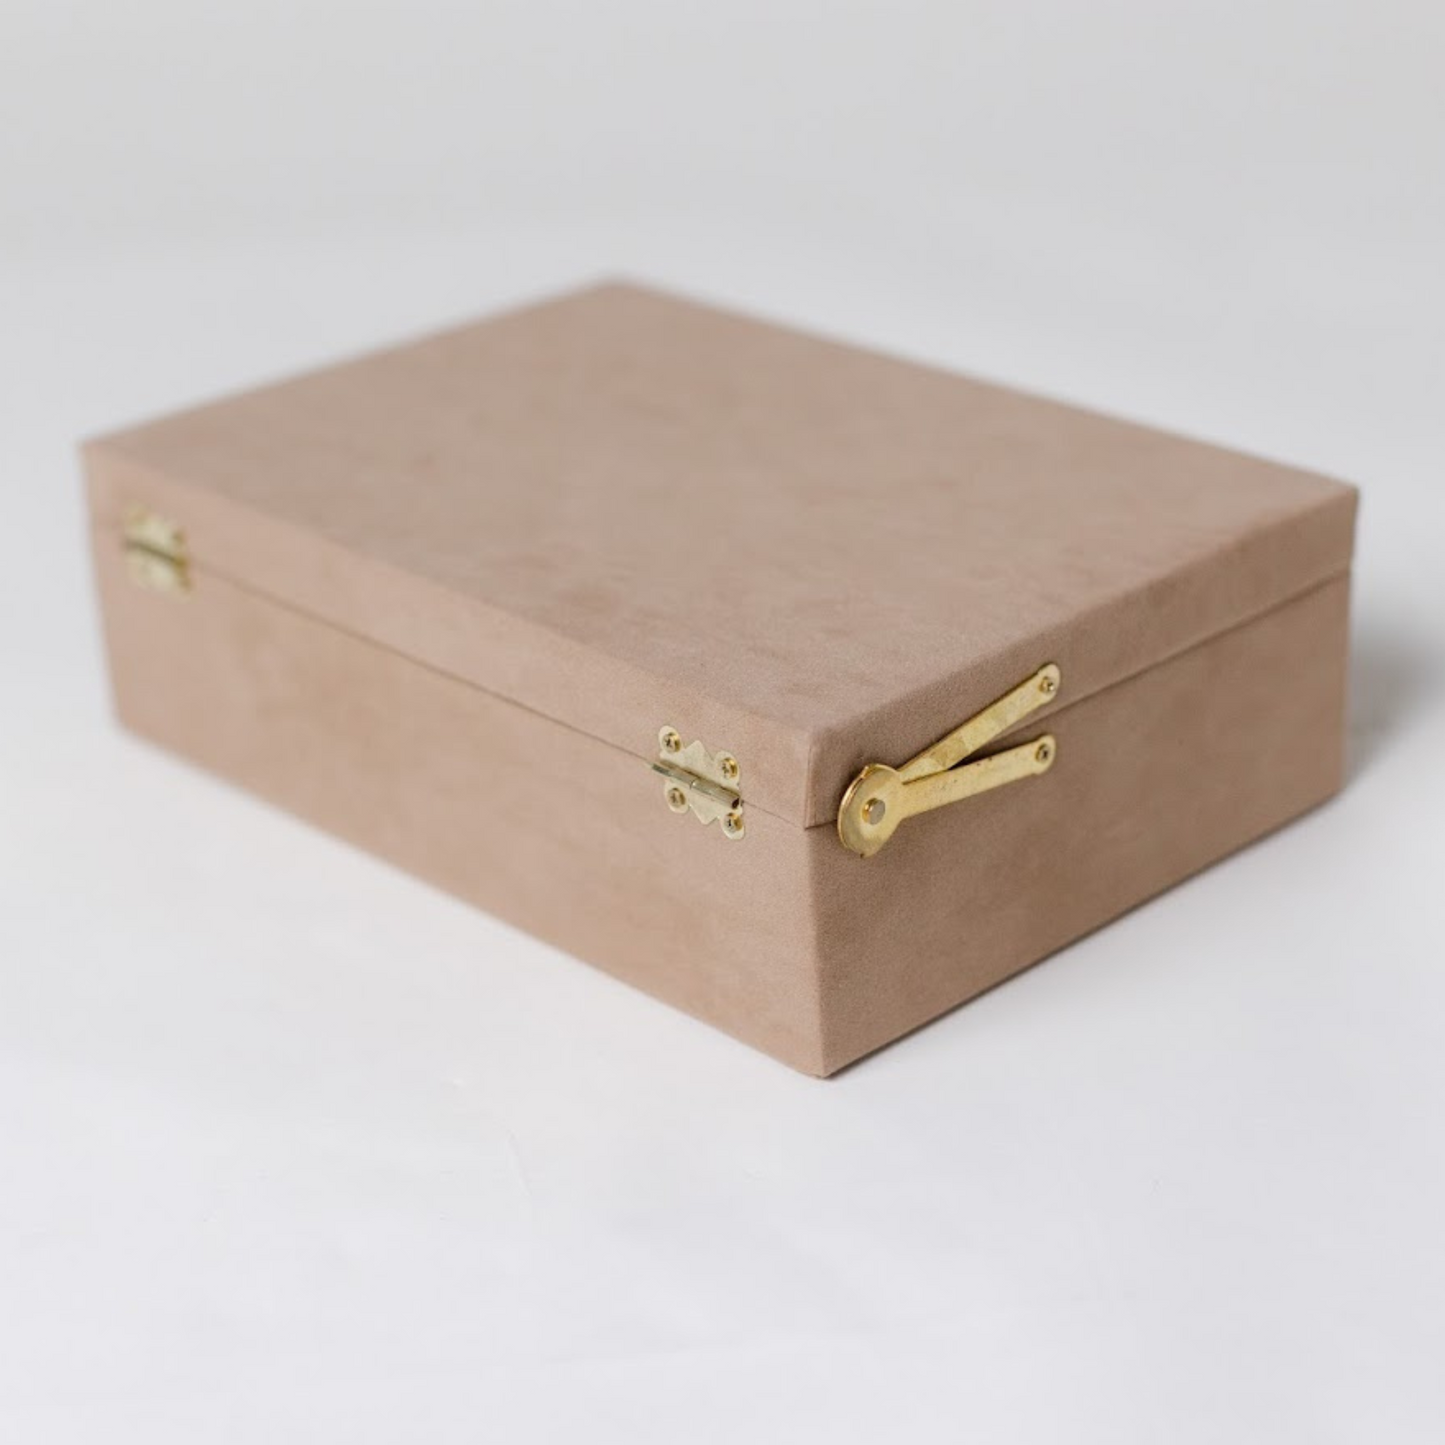 Ambika Luxury Gold Suede Gift Box